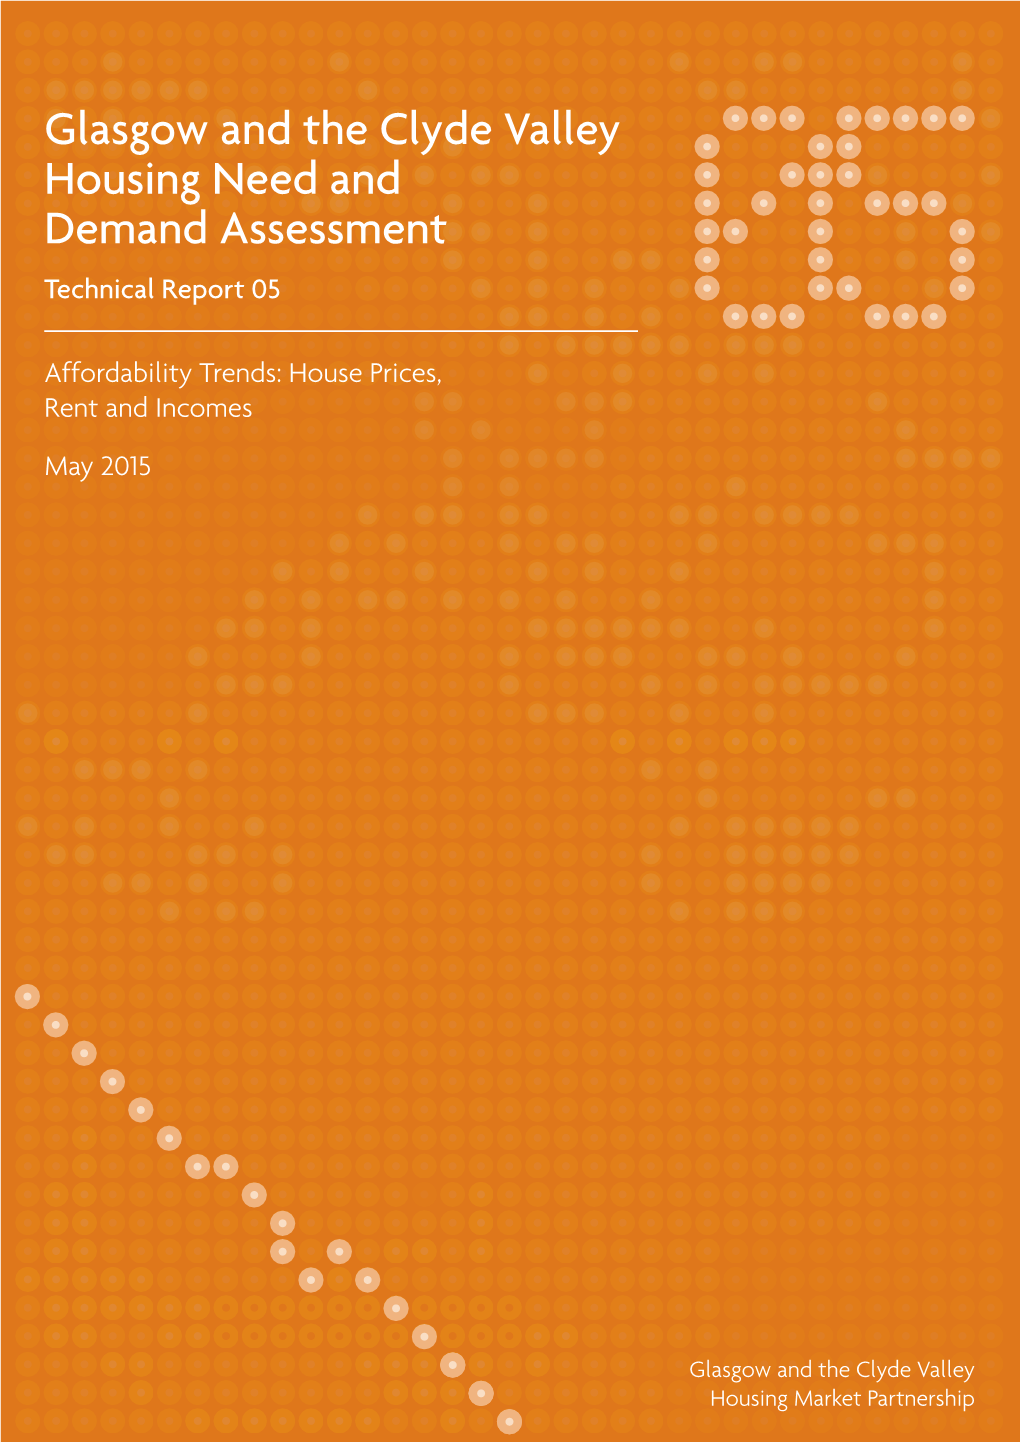 Glasgow and the Clyde Valley Housing Need and Demand Assessment Technical Report 05